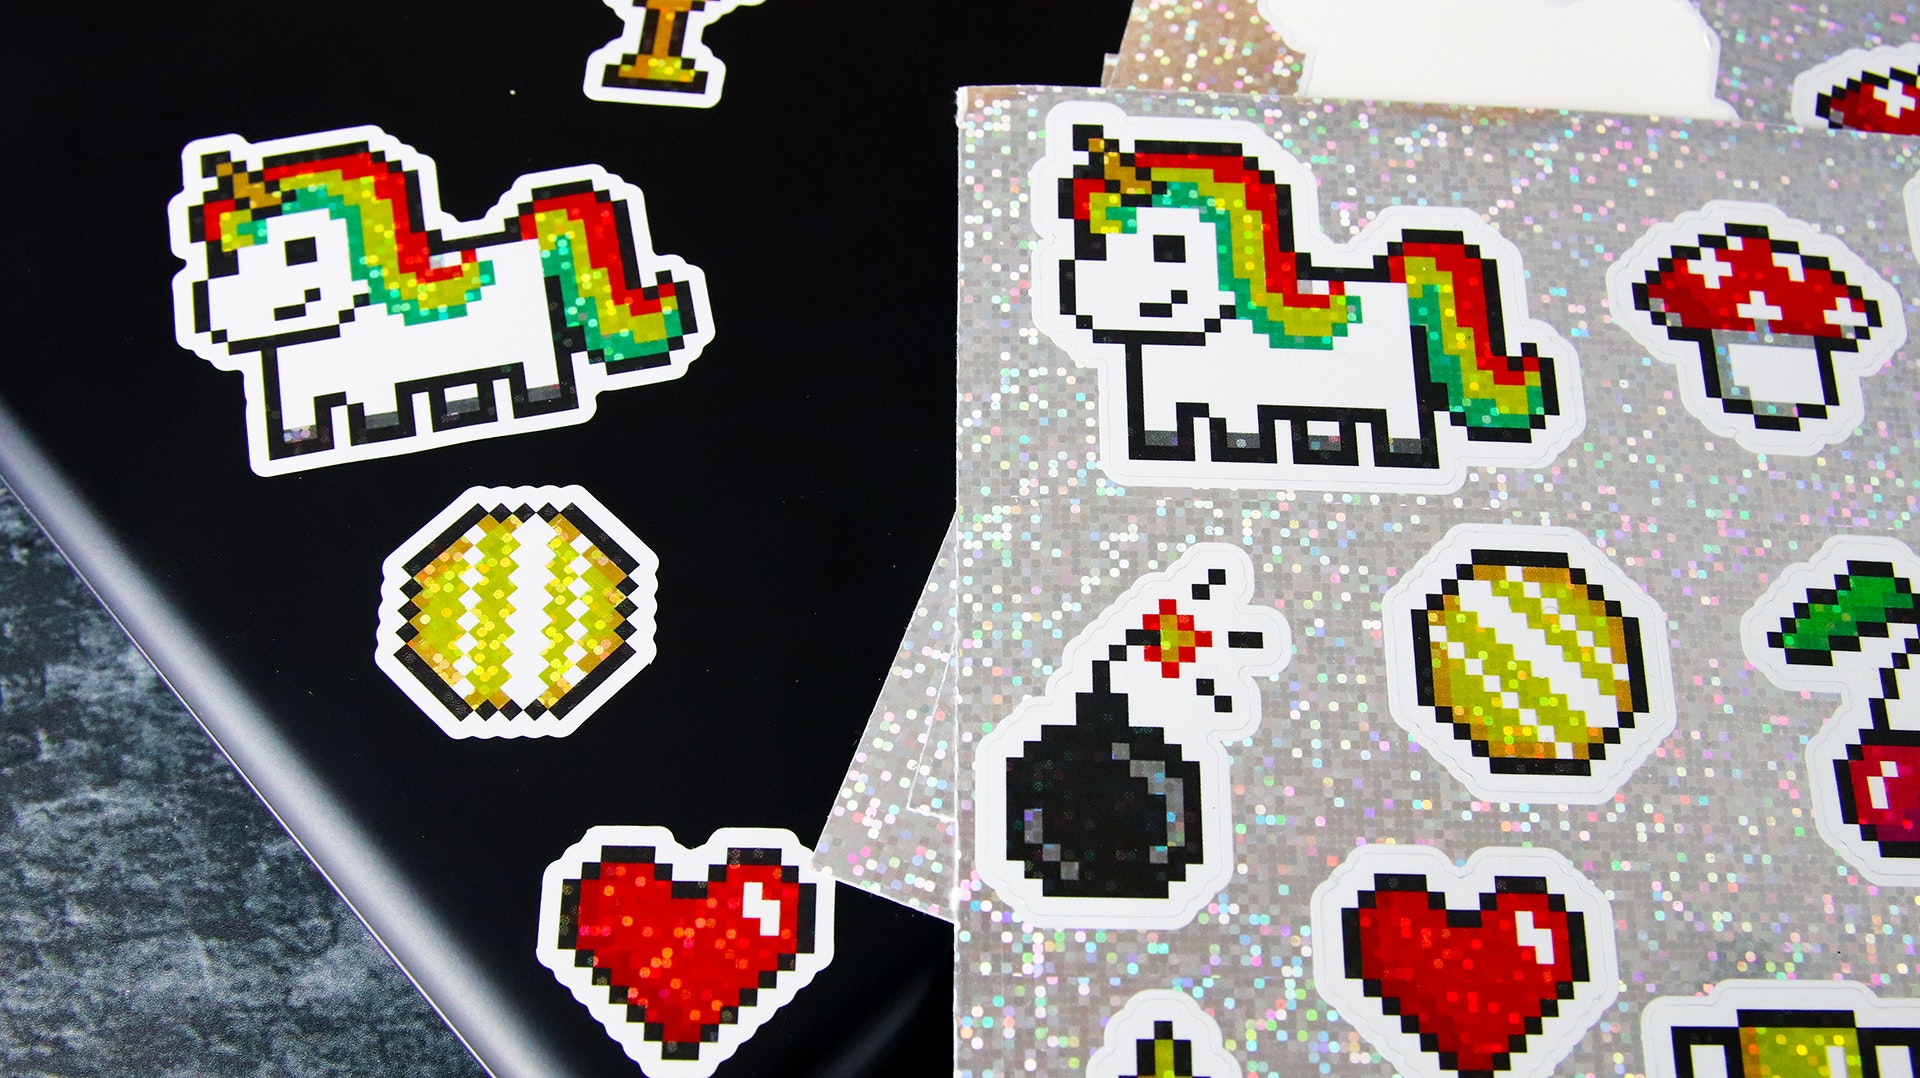 Sticker sheet with glitter labels with different cute designs applied to a black laptop